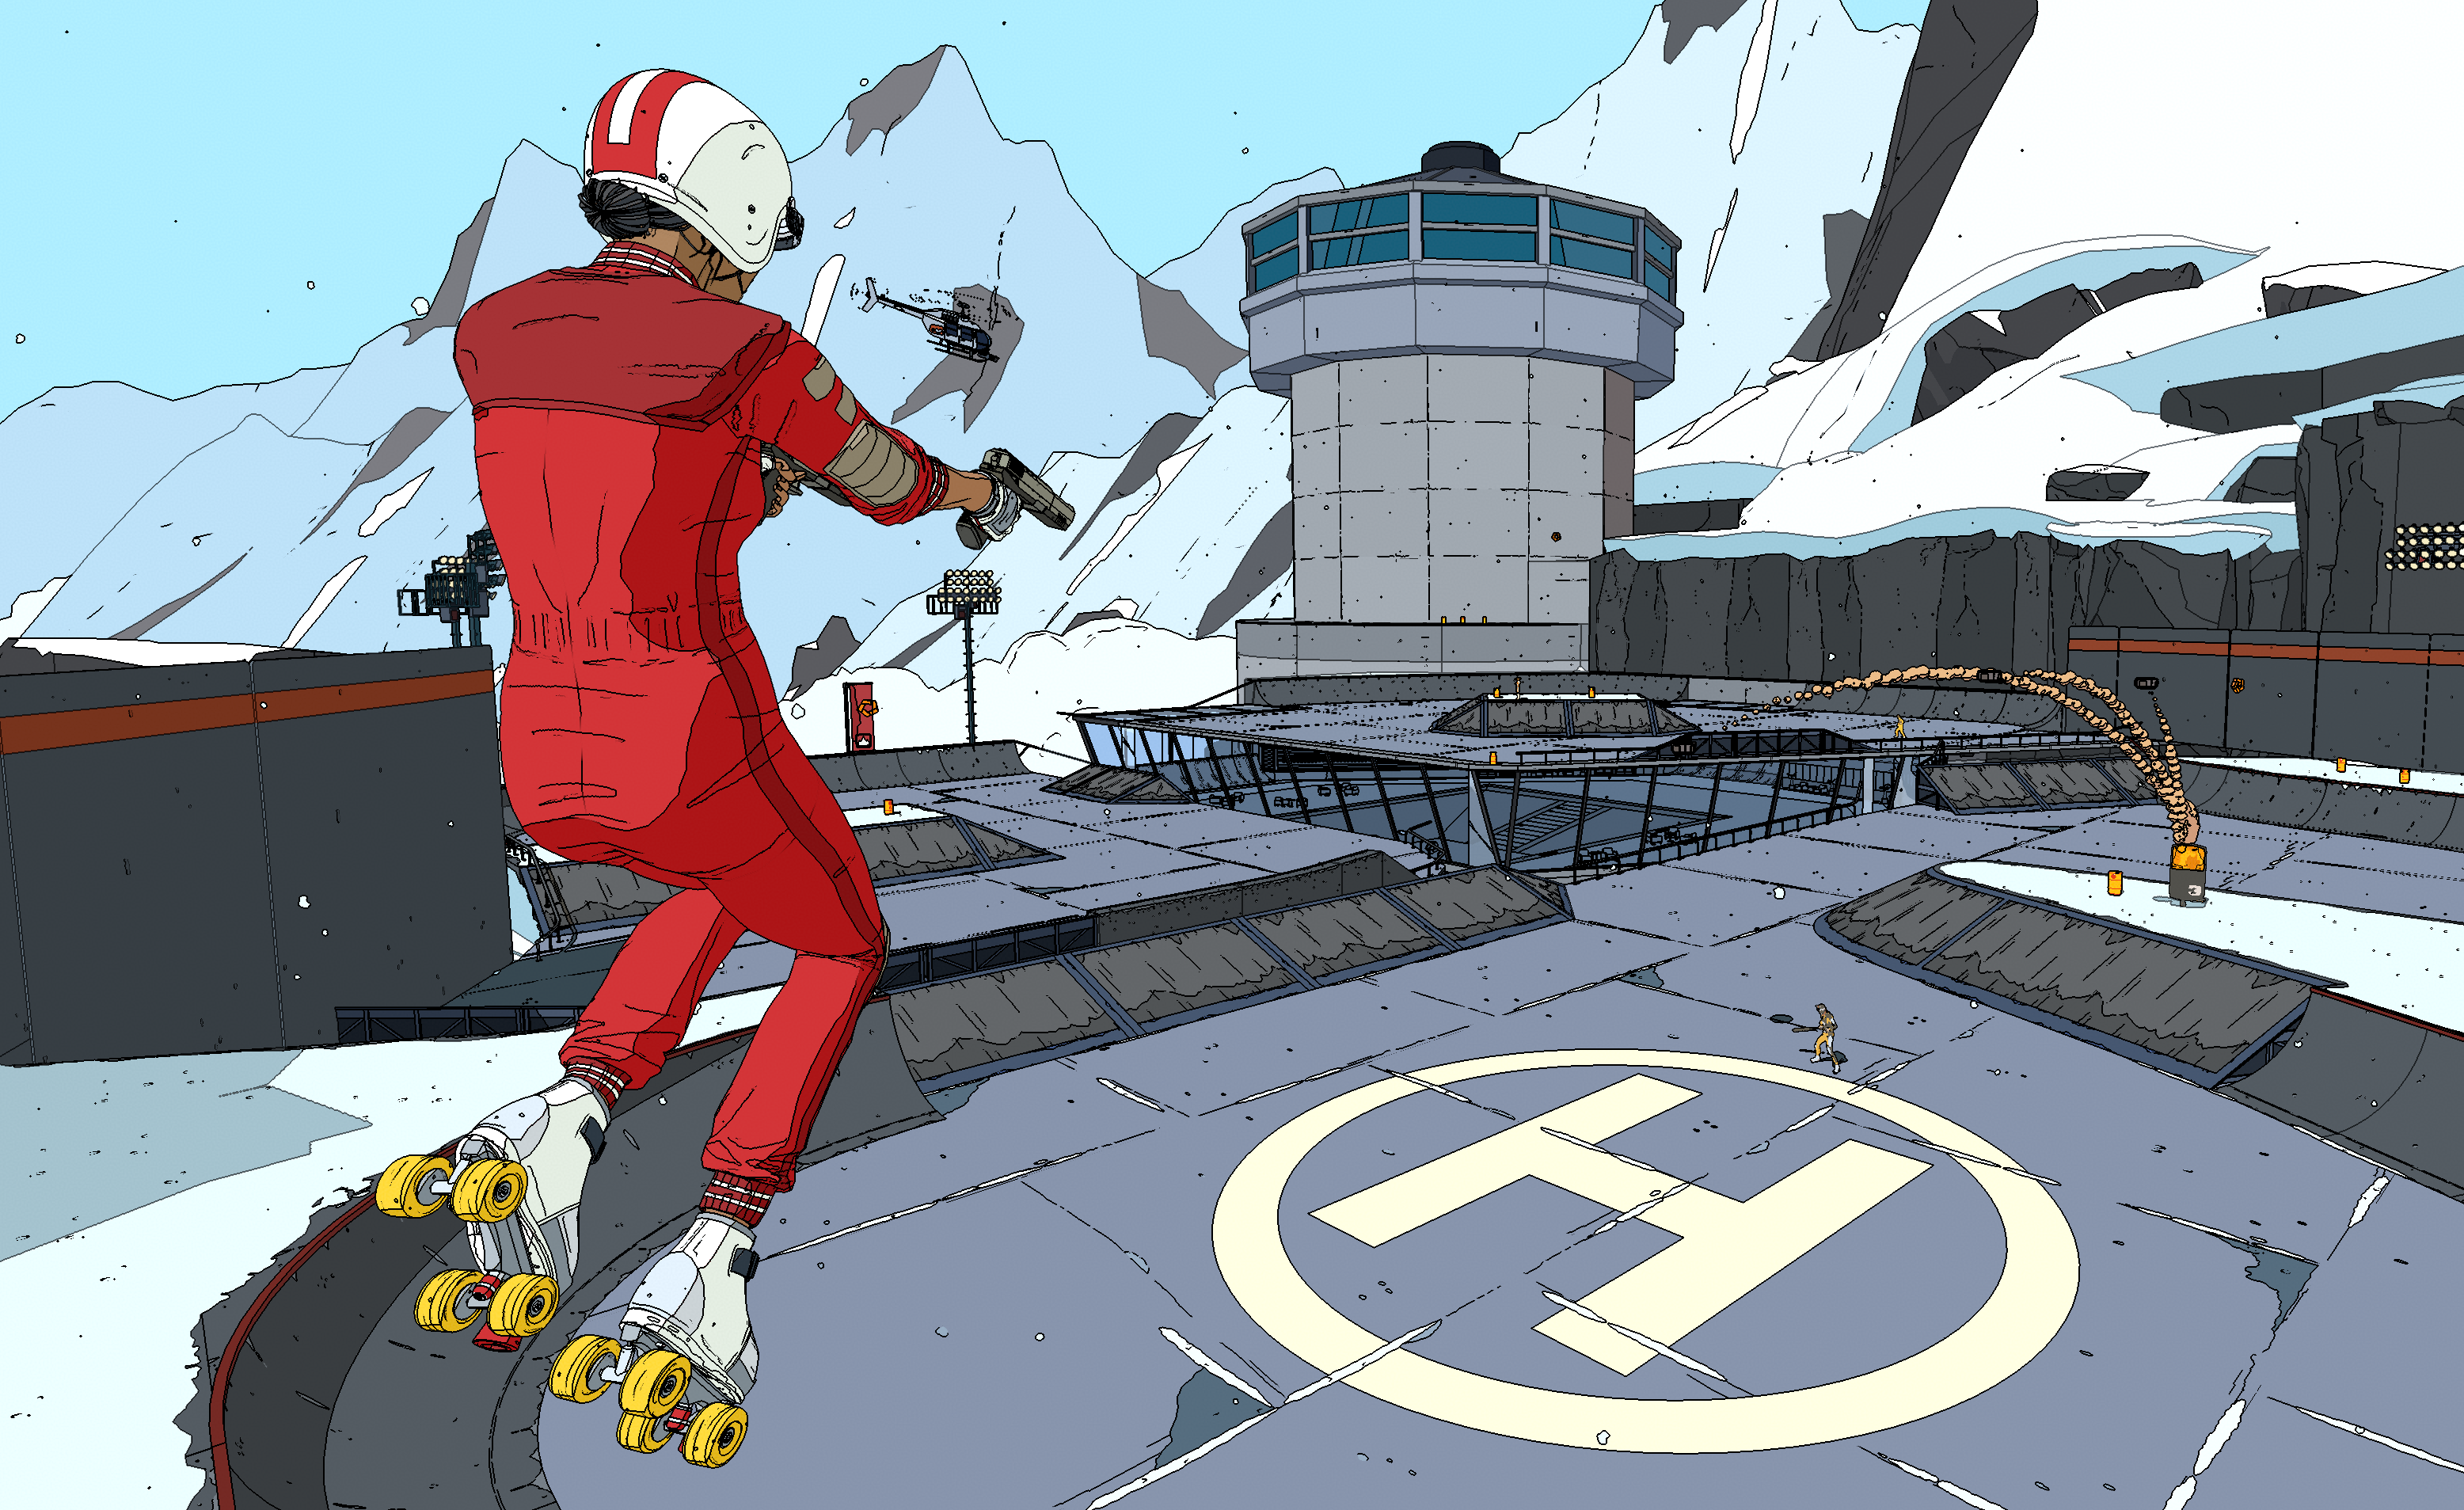 A person in roller skates and a red boilersuit aiming a gun, while flying high in the air, all in a cel-shaded art style.